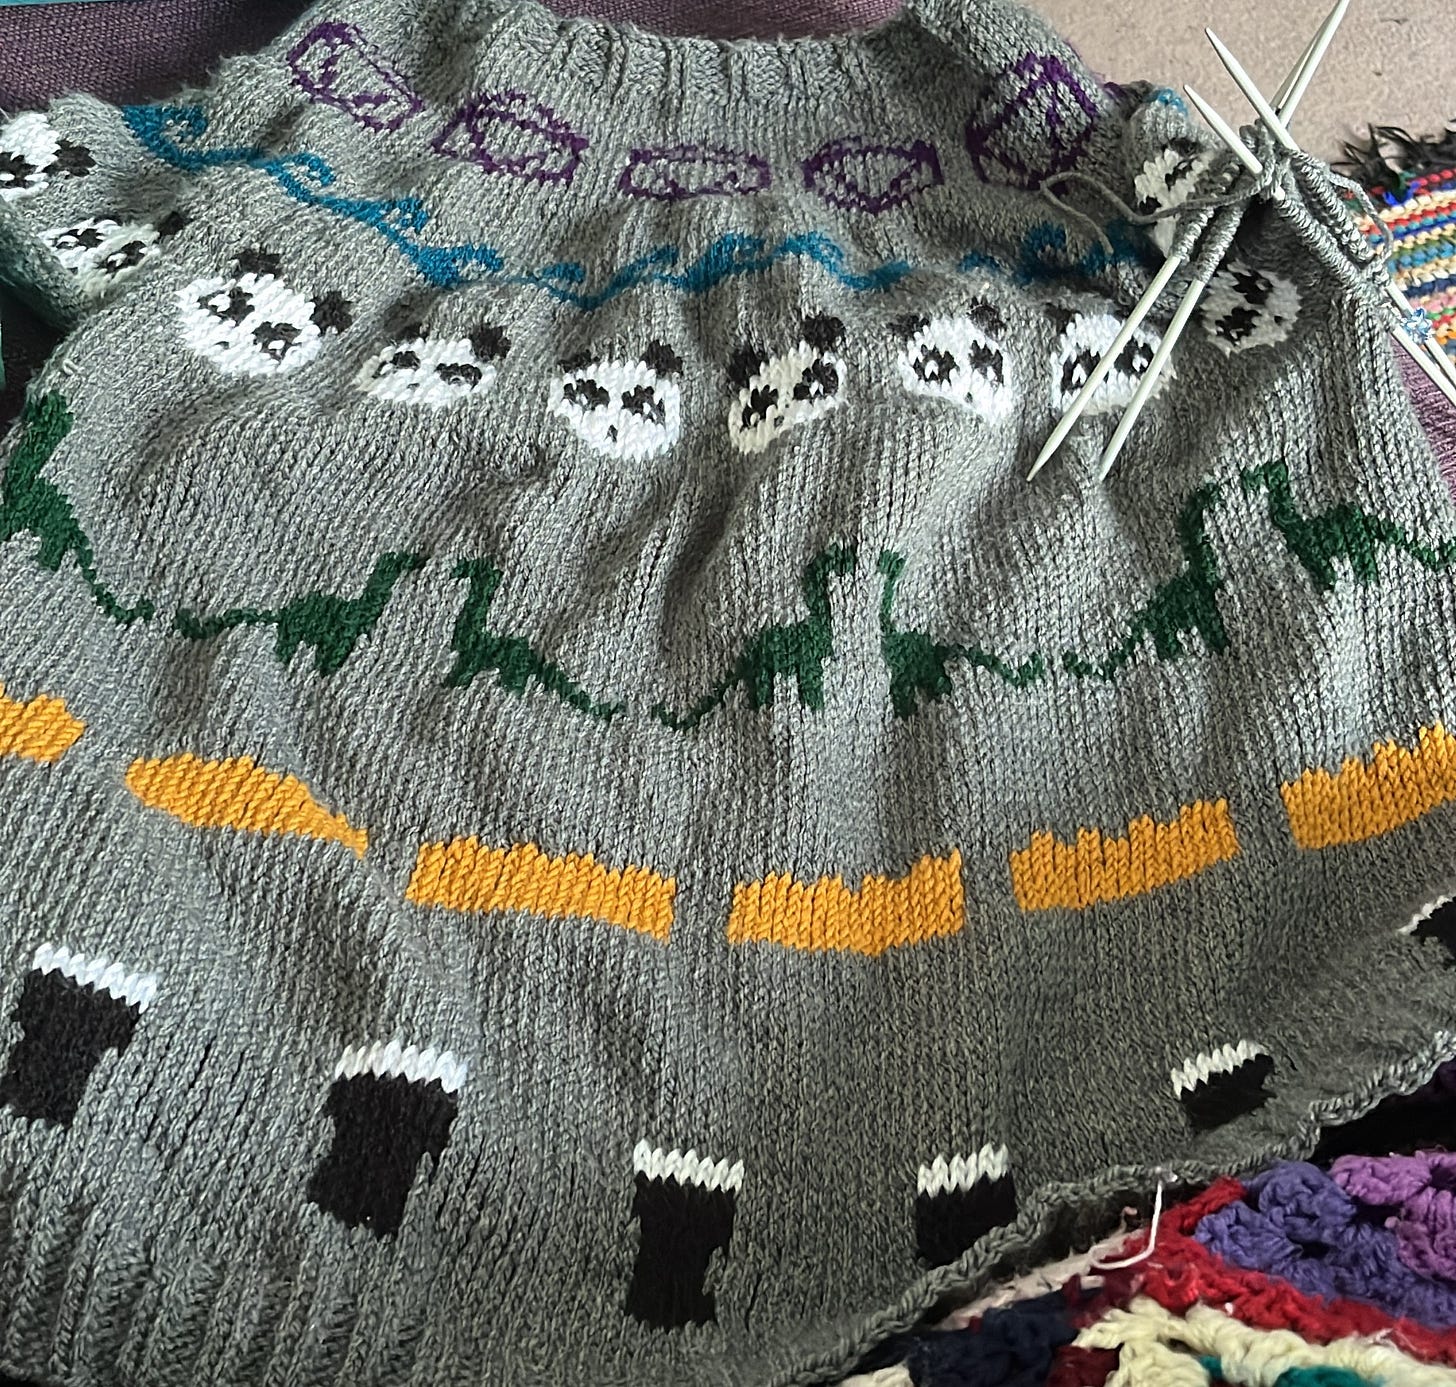 A top down knitted jumper in grey with rows of repeated motifs: A purple D20, blue wavs, a pandas face, dinosaurs, yellow lego brick and a pint of dark beer